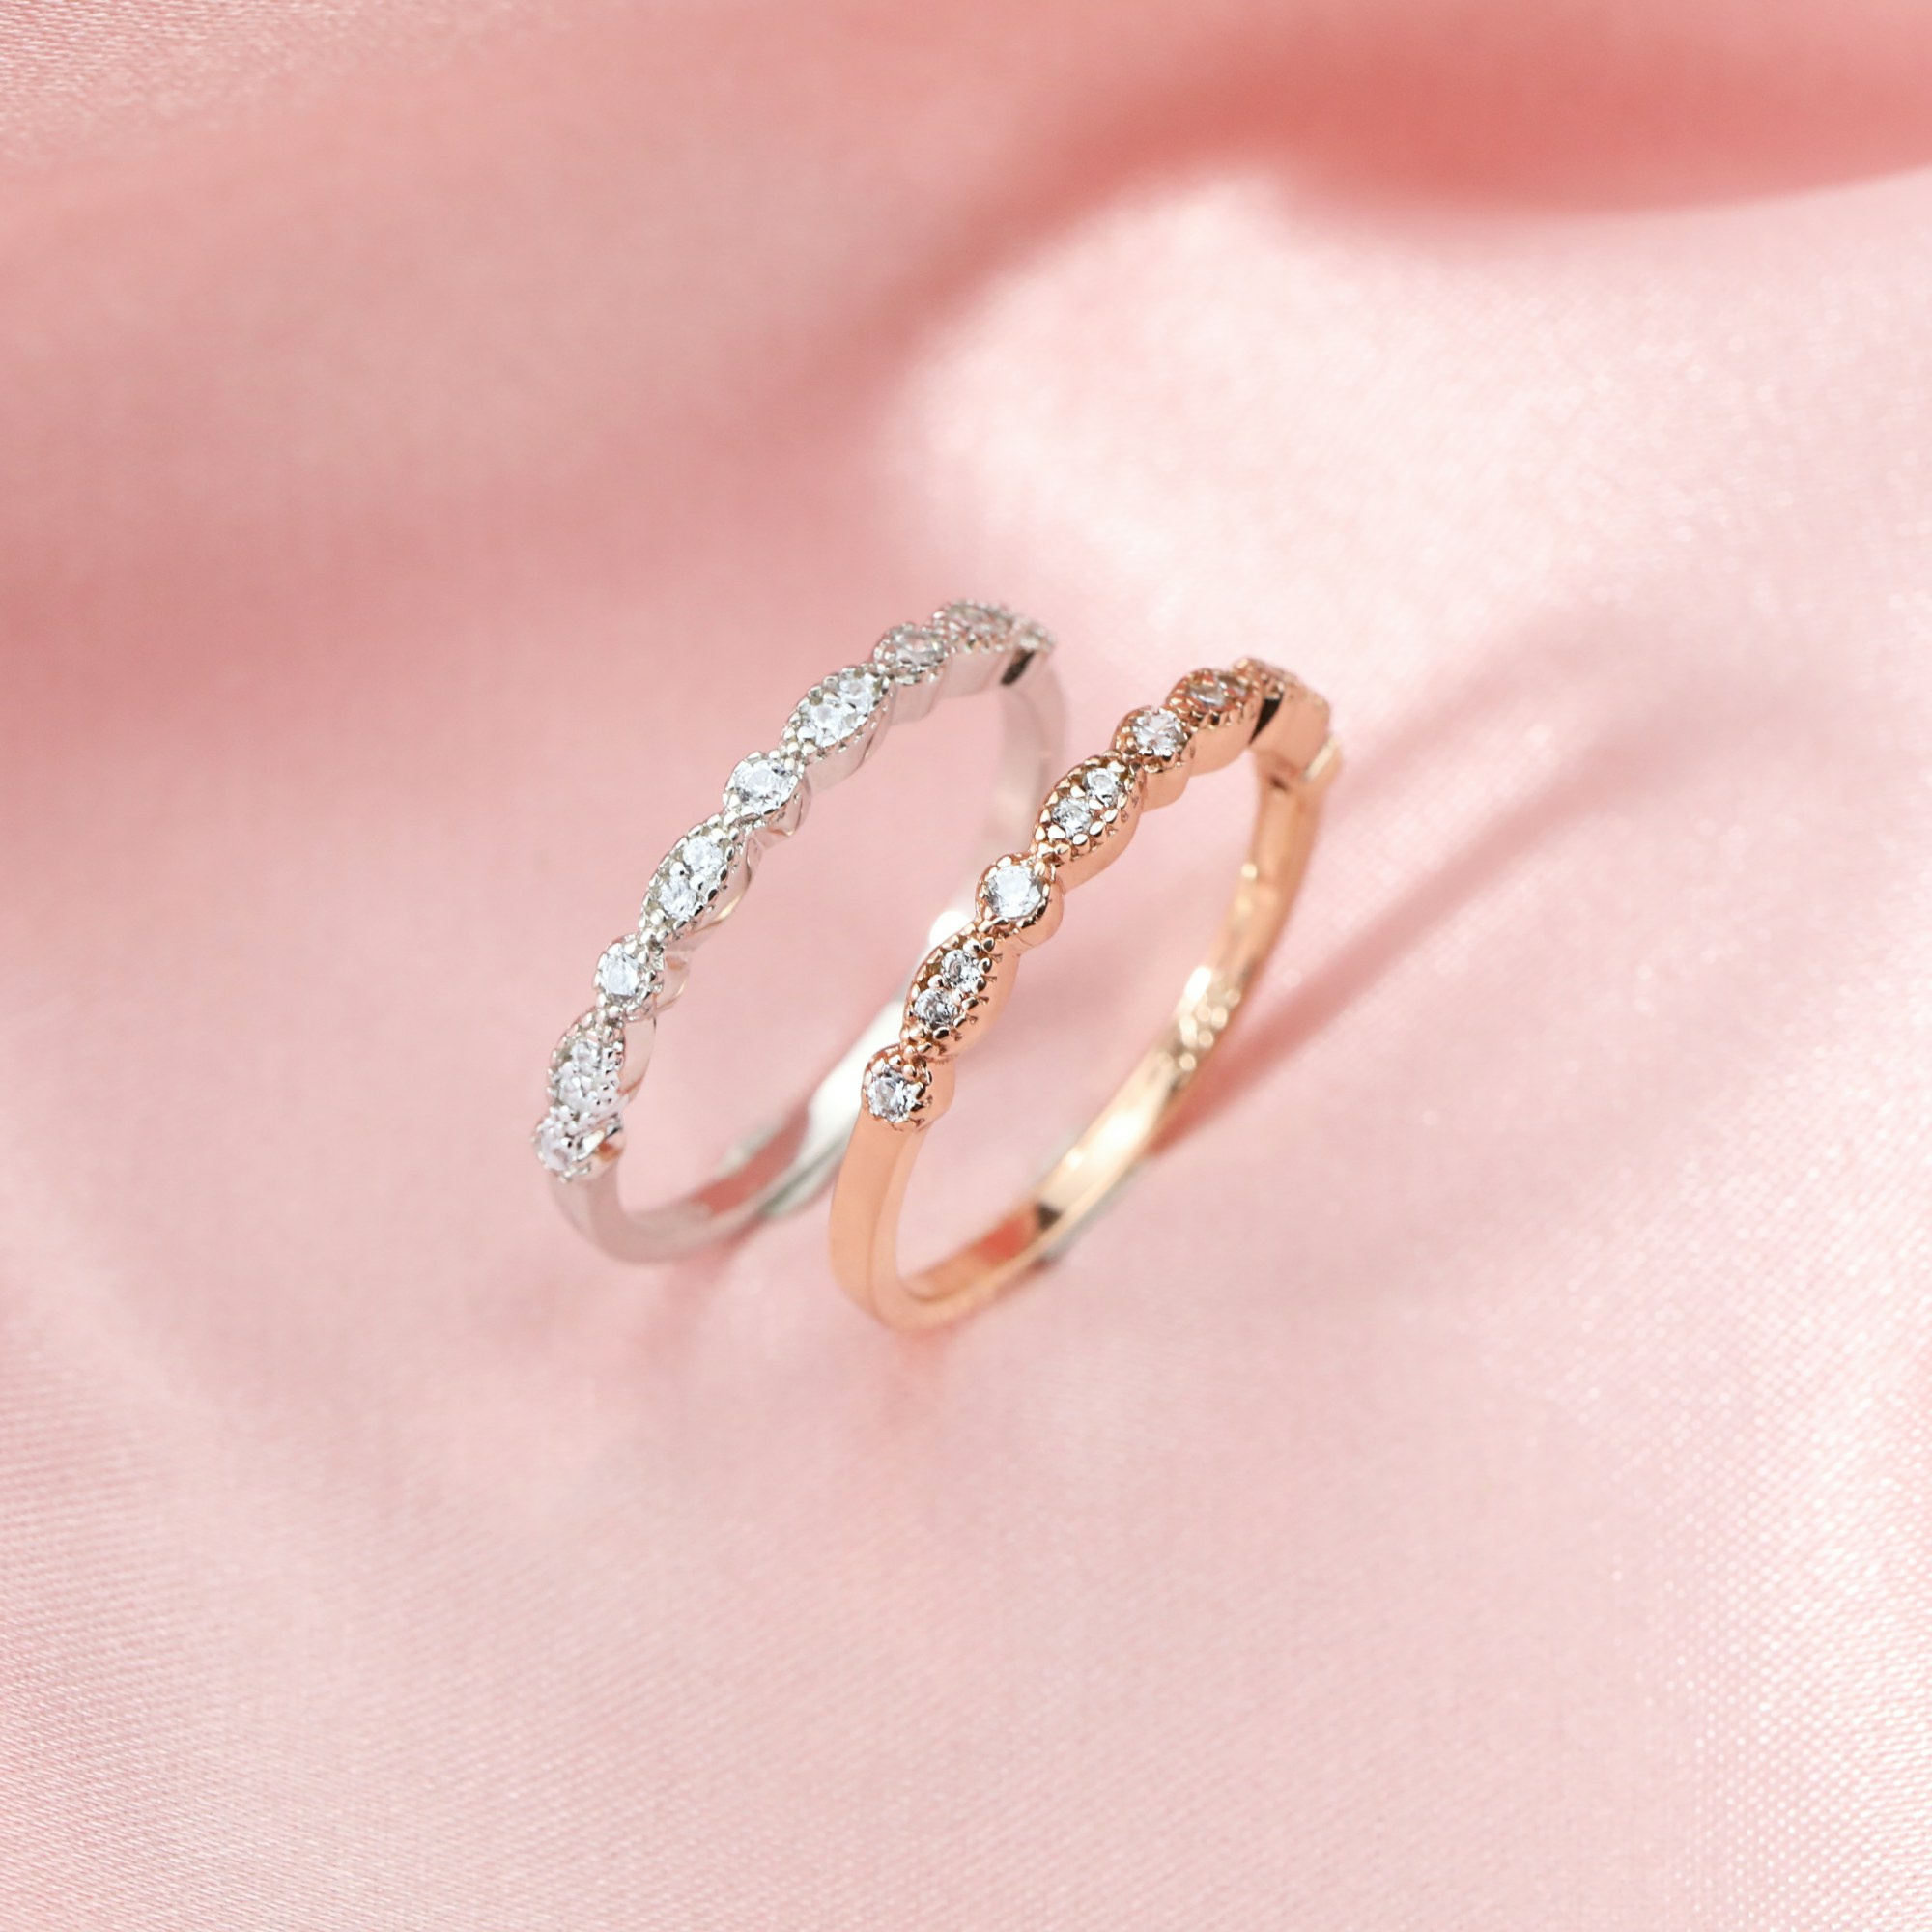 Dainty Moissanite Diamond April Birthstone Stackable Ring Wedding Engagement Half Band Antiqued Marquise Eternity Ring Rose Gold Plated Solid 925 Sterling Silver 1294255 - Click Image to Close